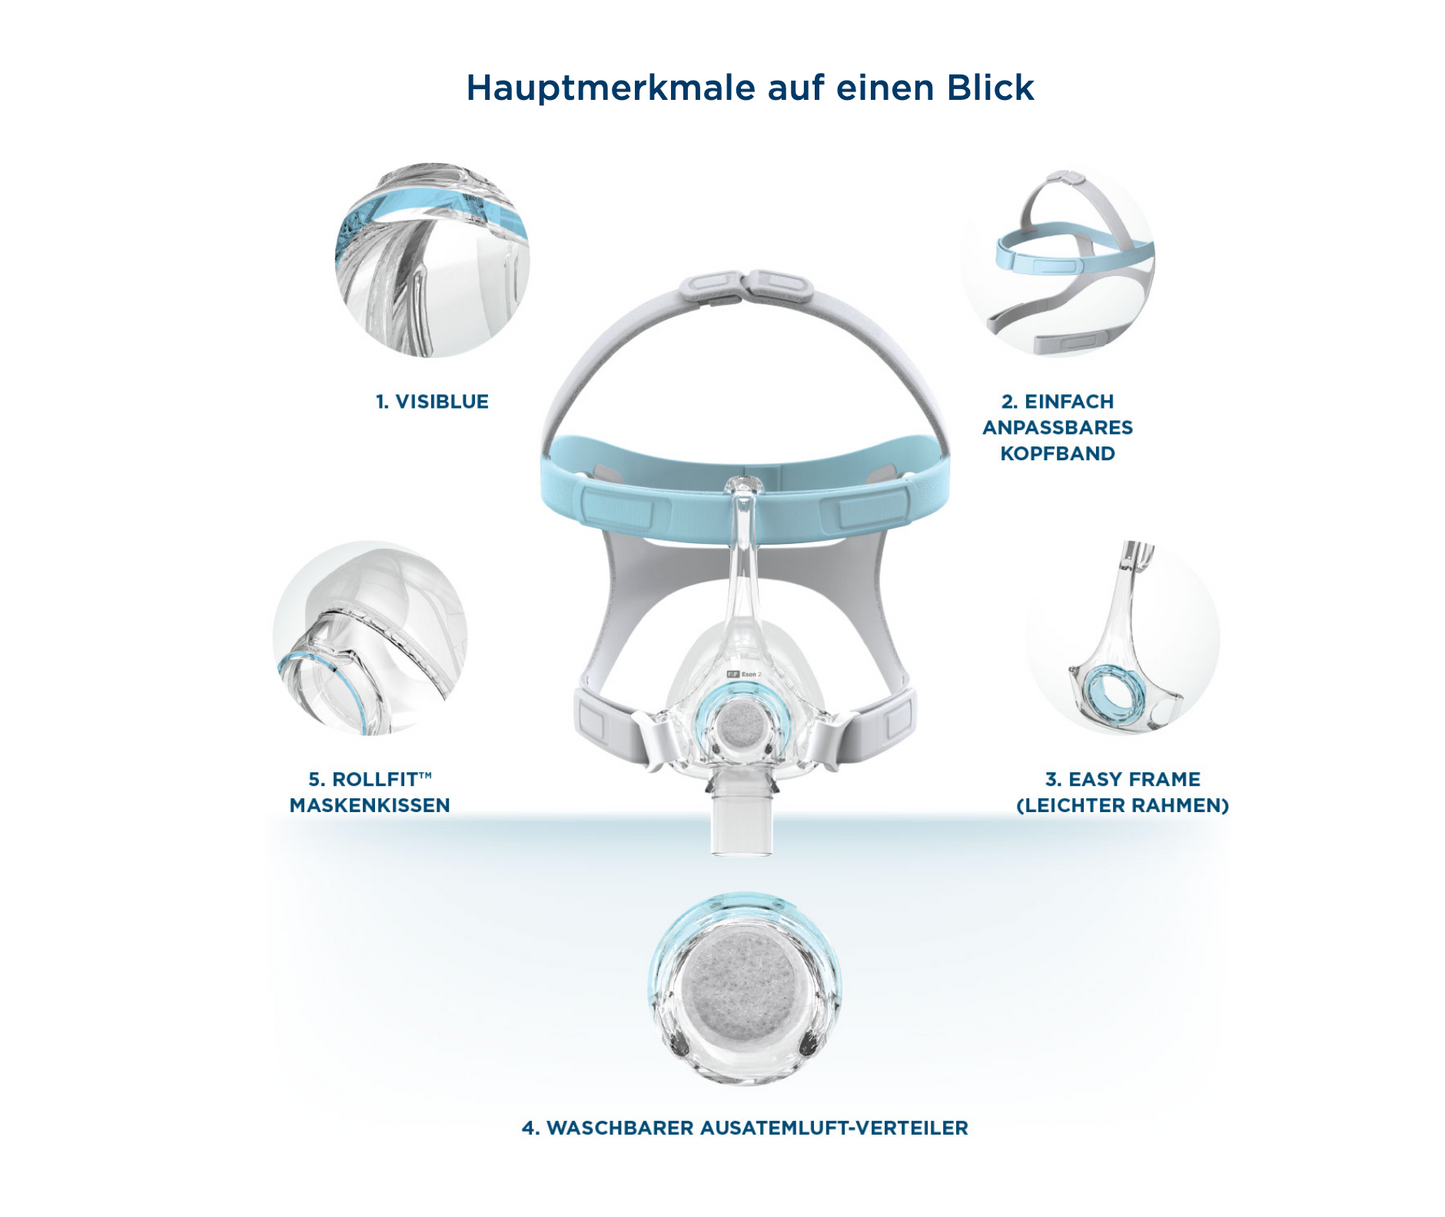 Fisher &amp; Paykel Eson™ 2 Nasal Mask incl. Replacement Pillow - PAP Sleep Therapy Mask